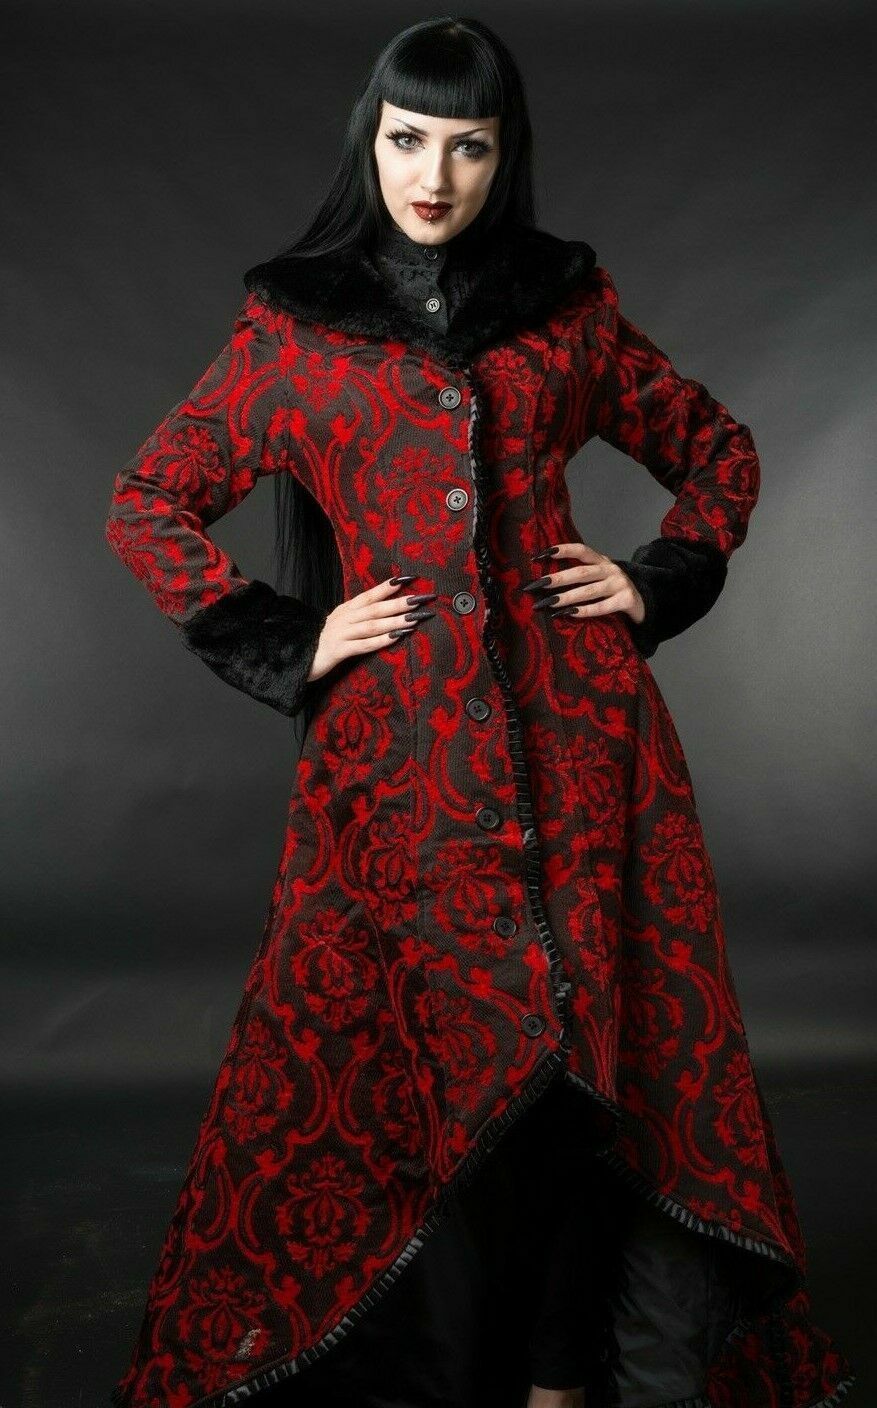 Primary image for Women's Red Black Brocade Gothic Victorian Fall Winter Long Steampunk Coat